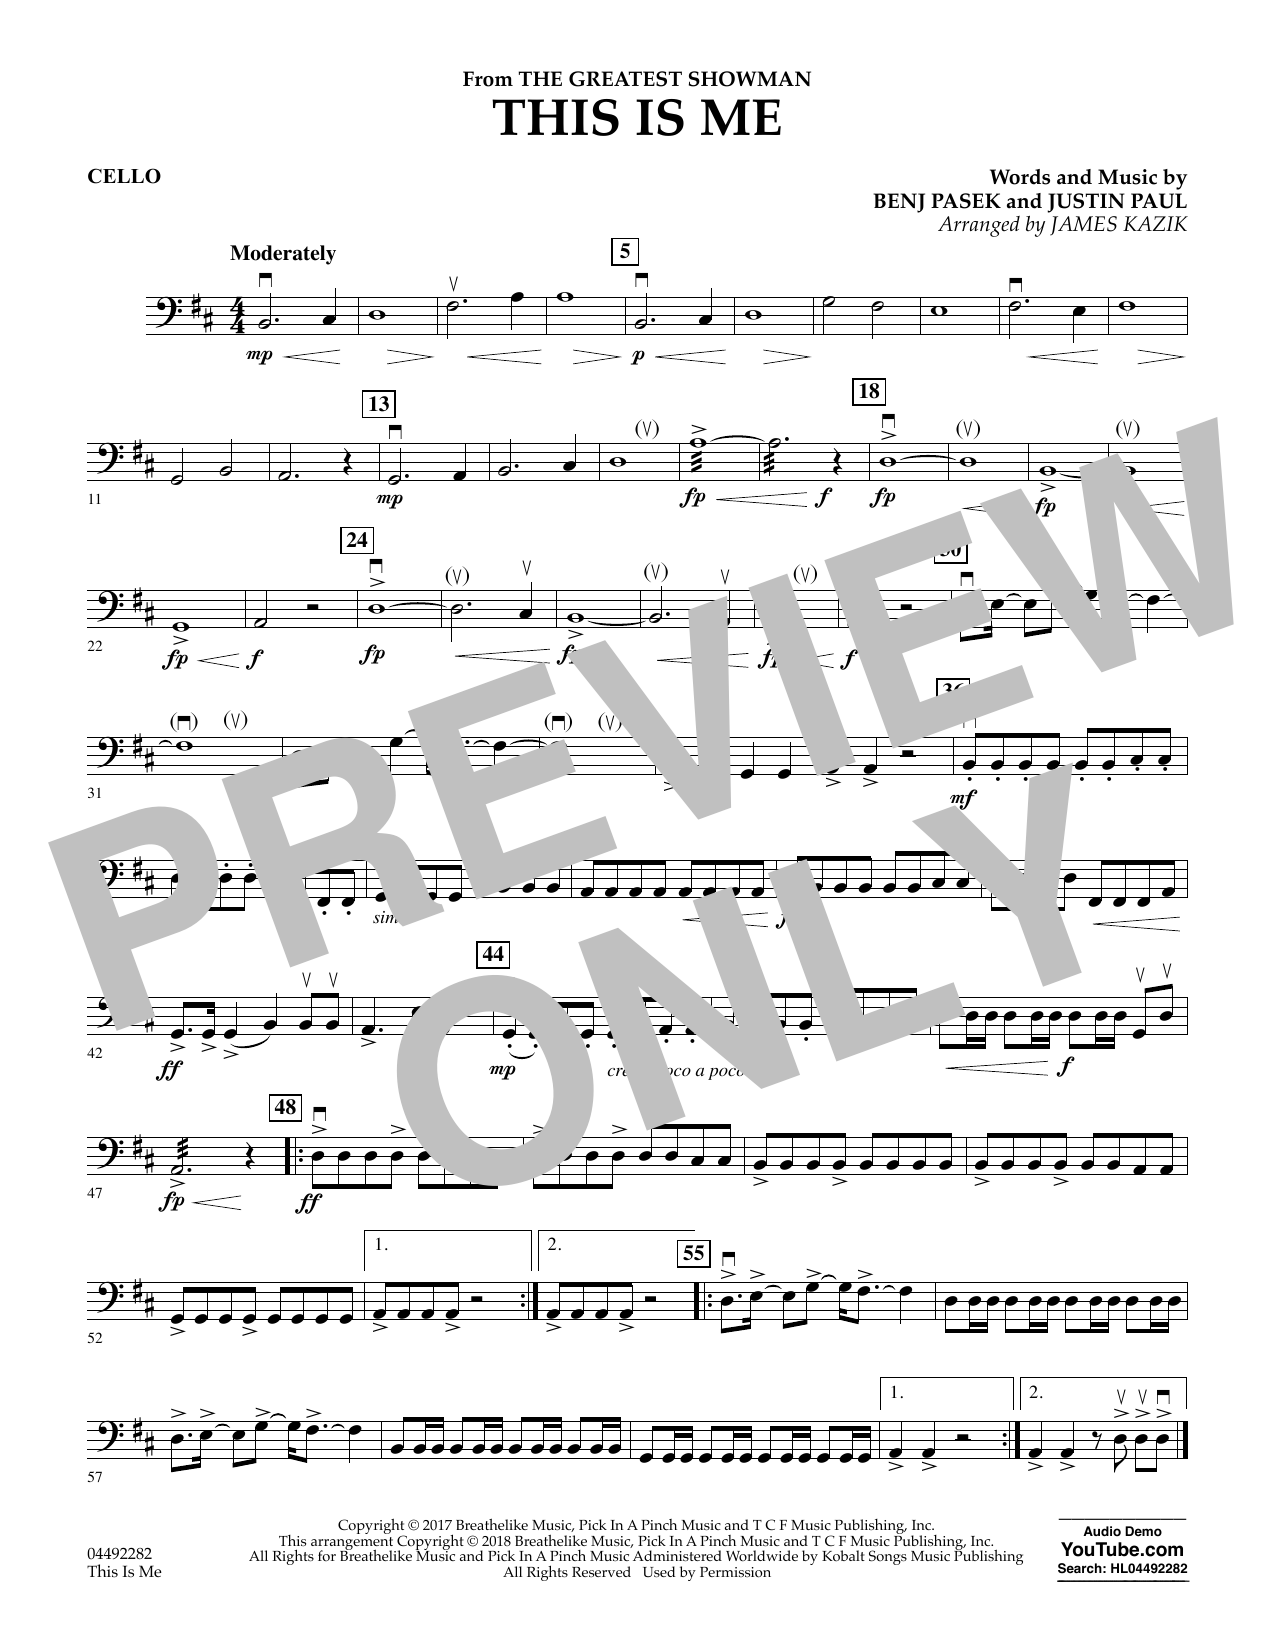 Download James Kazik This Is Me (from The Greatest Showman) Sheet Music